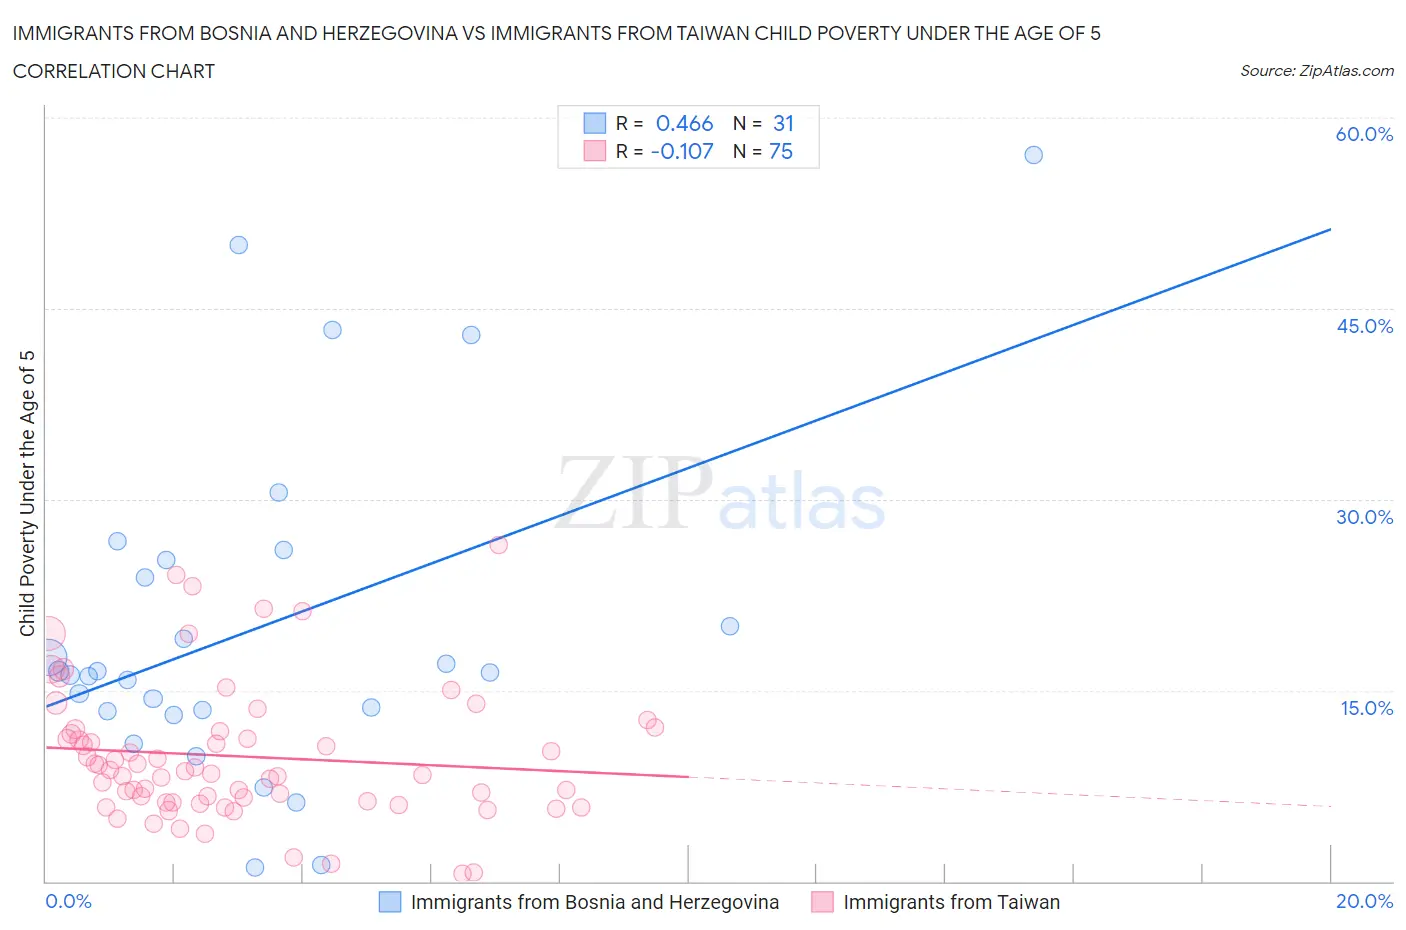 Immigrants from Bosnia and Herzegovina vs Immigrants from Taiwan Child Poverty Under the Age of 5